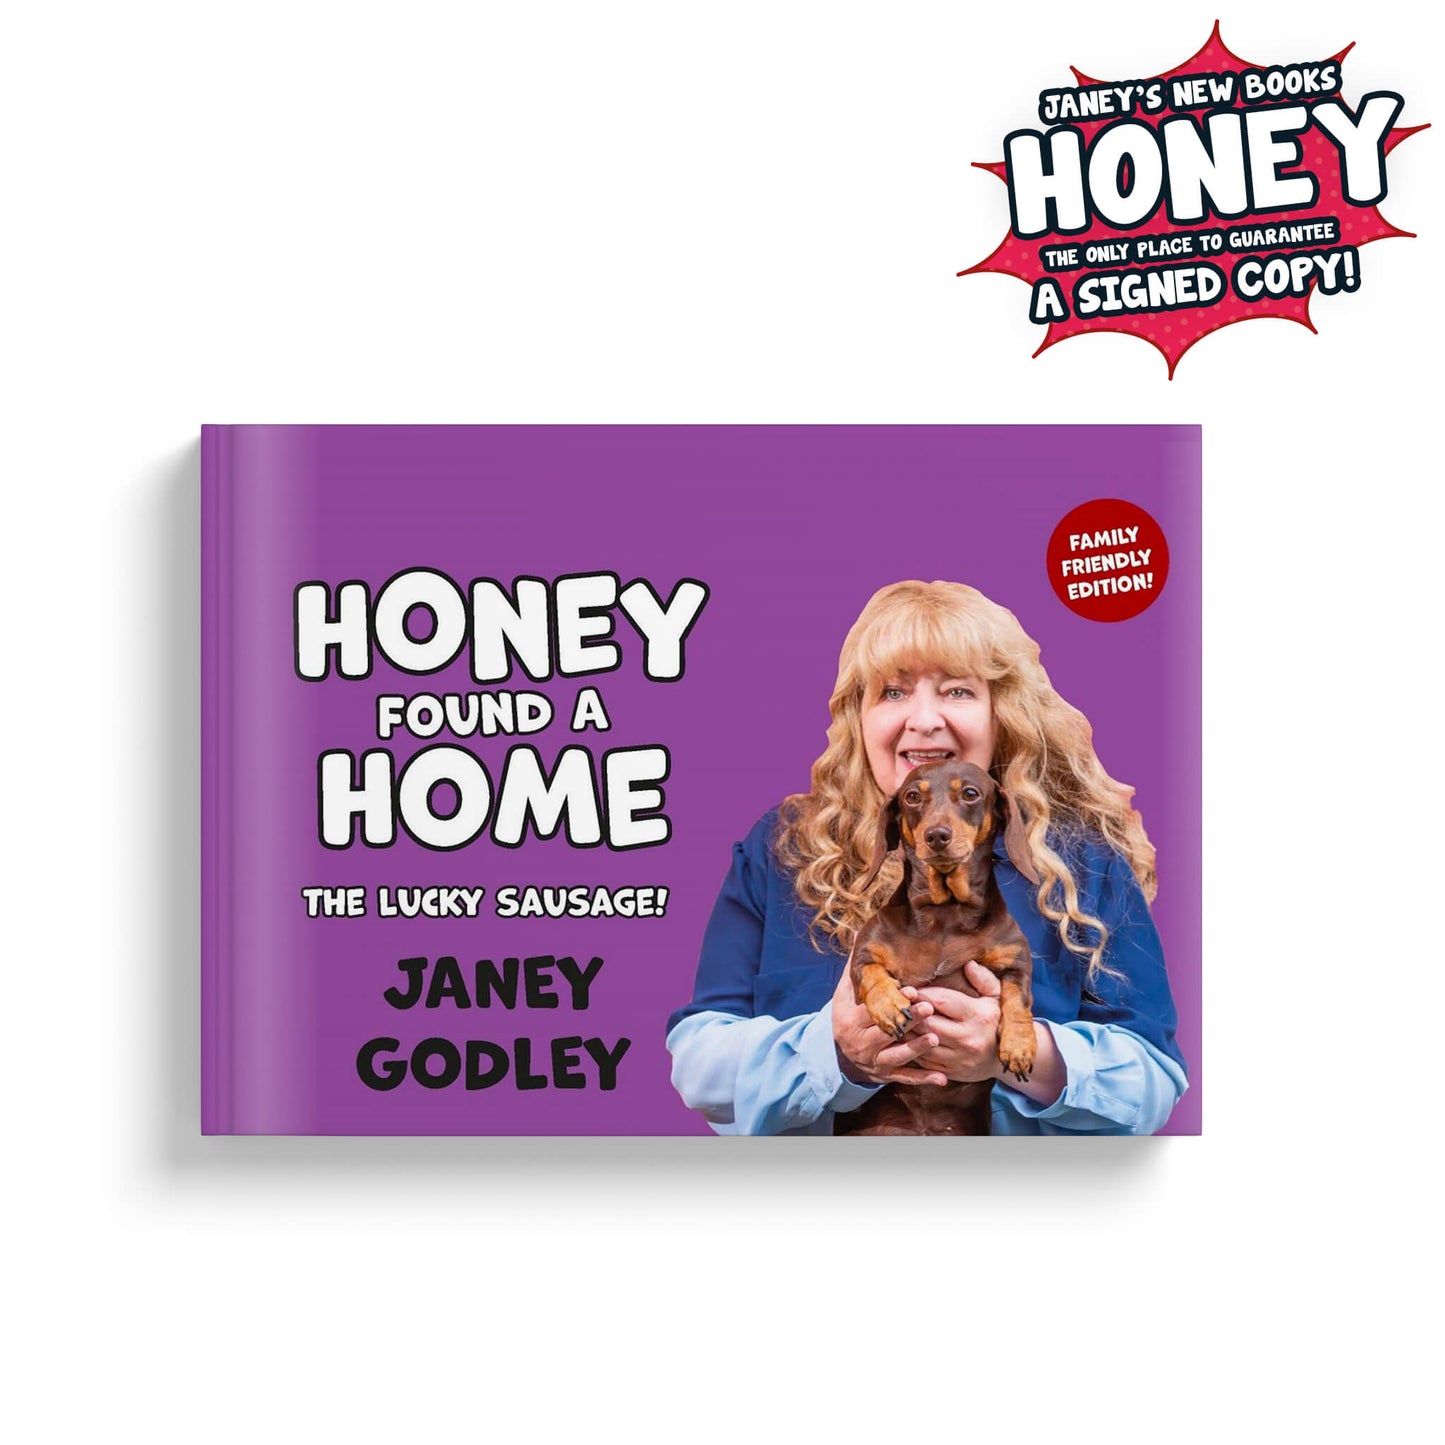 Honey Found A Home The Lucky Sausage by Janey Godley